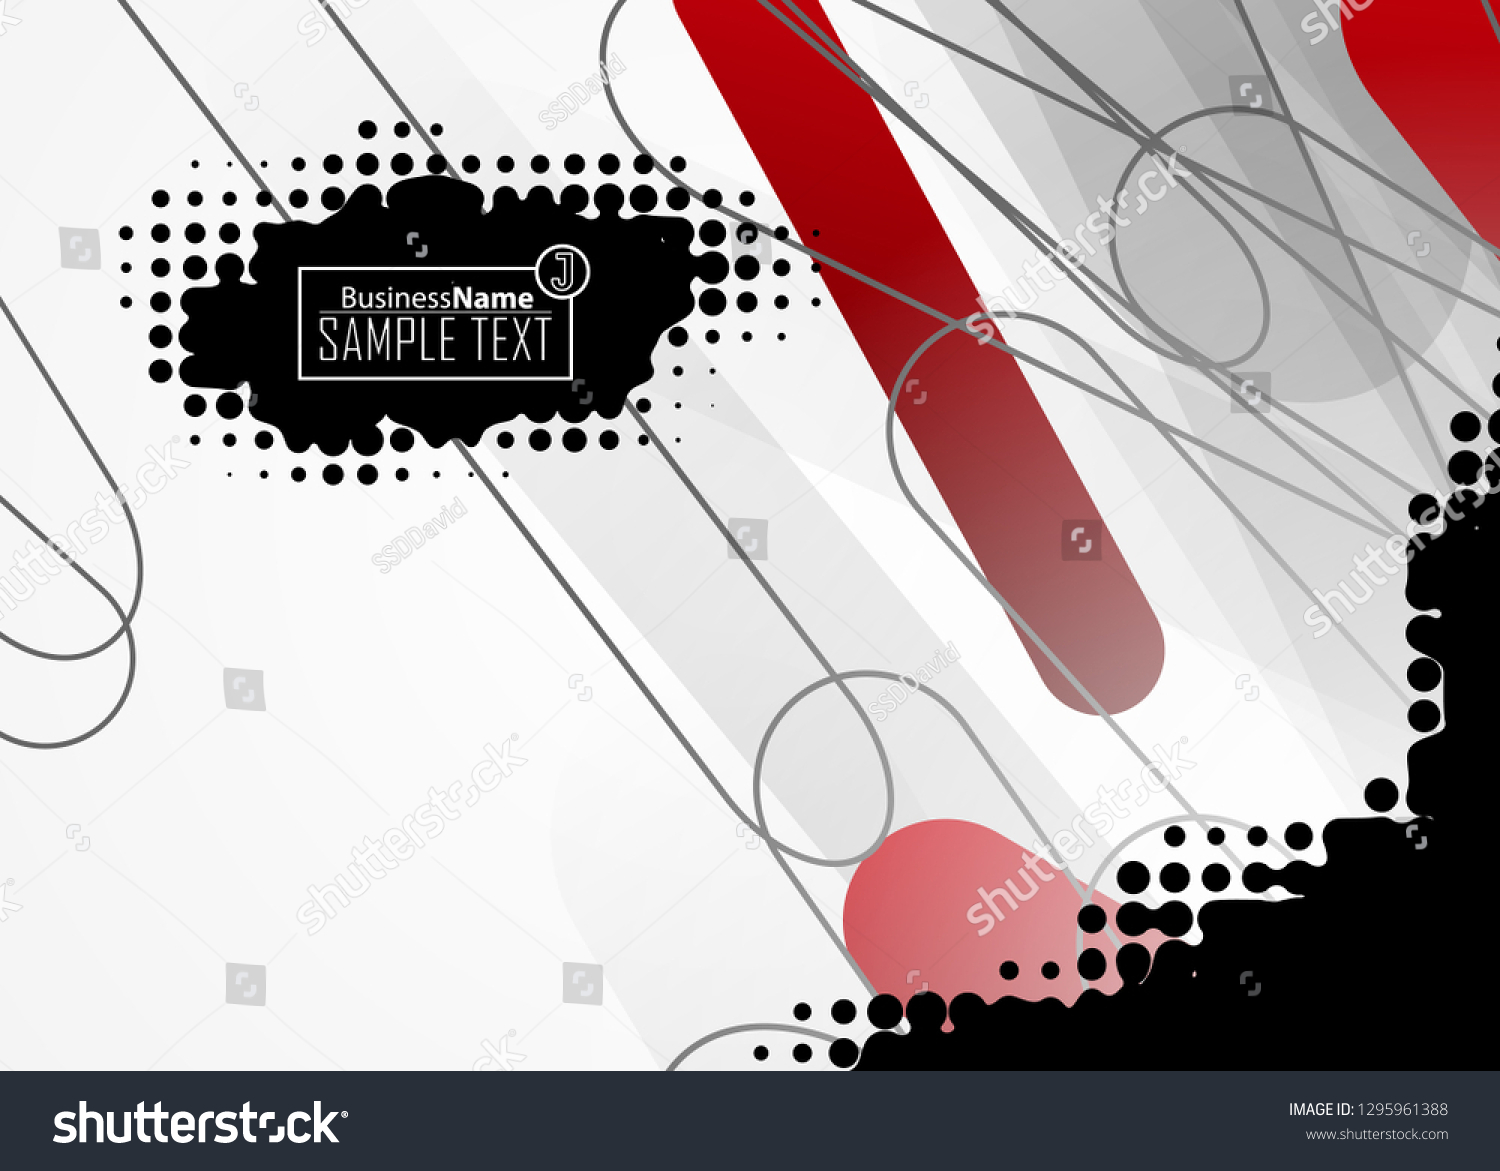 Red contrast abstract technology background. Red corporate design. Abstract tech corporate red design flyer background. Black geometric illustration for flyer, brochures, web graphic design background #1295961388